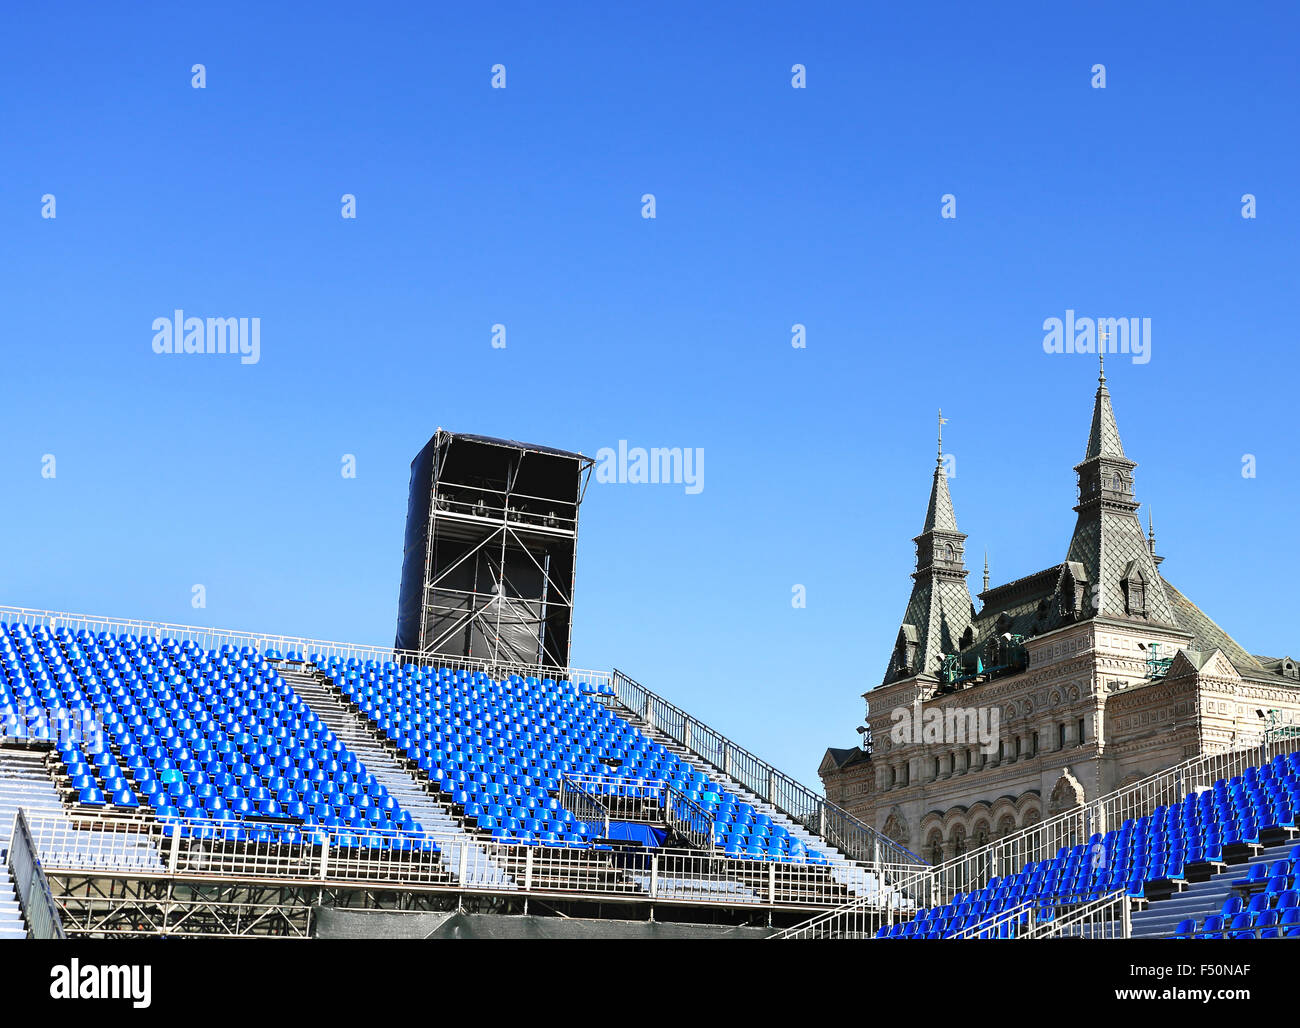 Spectator tribunes and scenery on the Red Square in Moscow in preparation for the festival Stock Photo